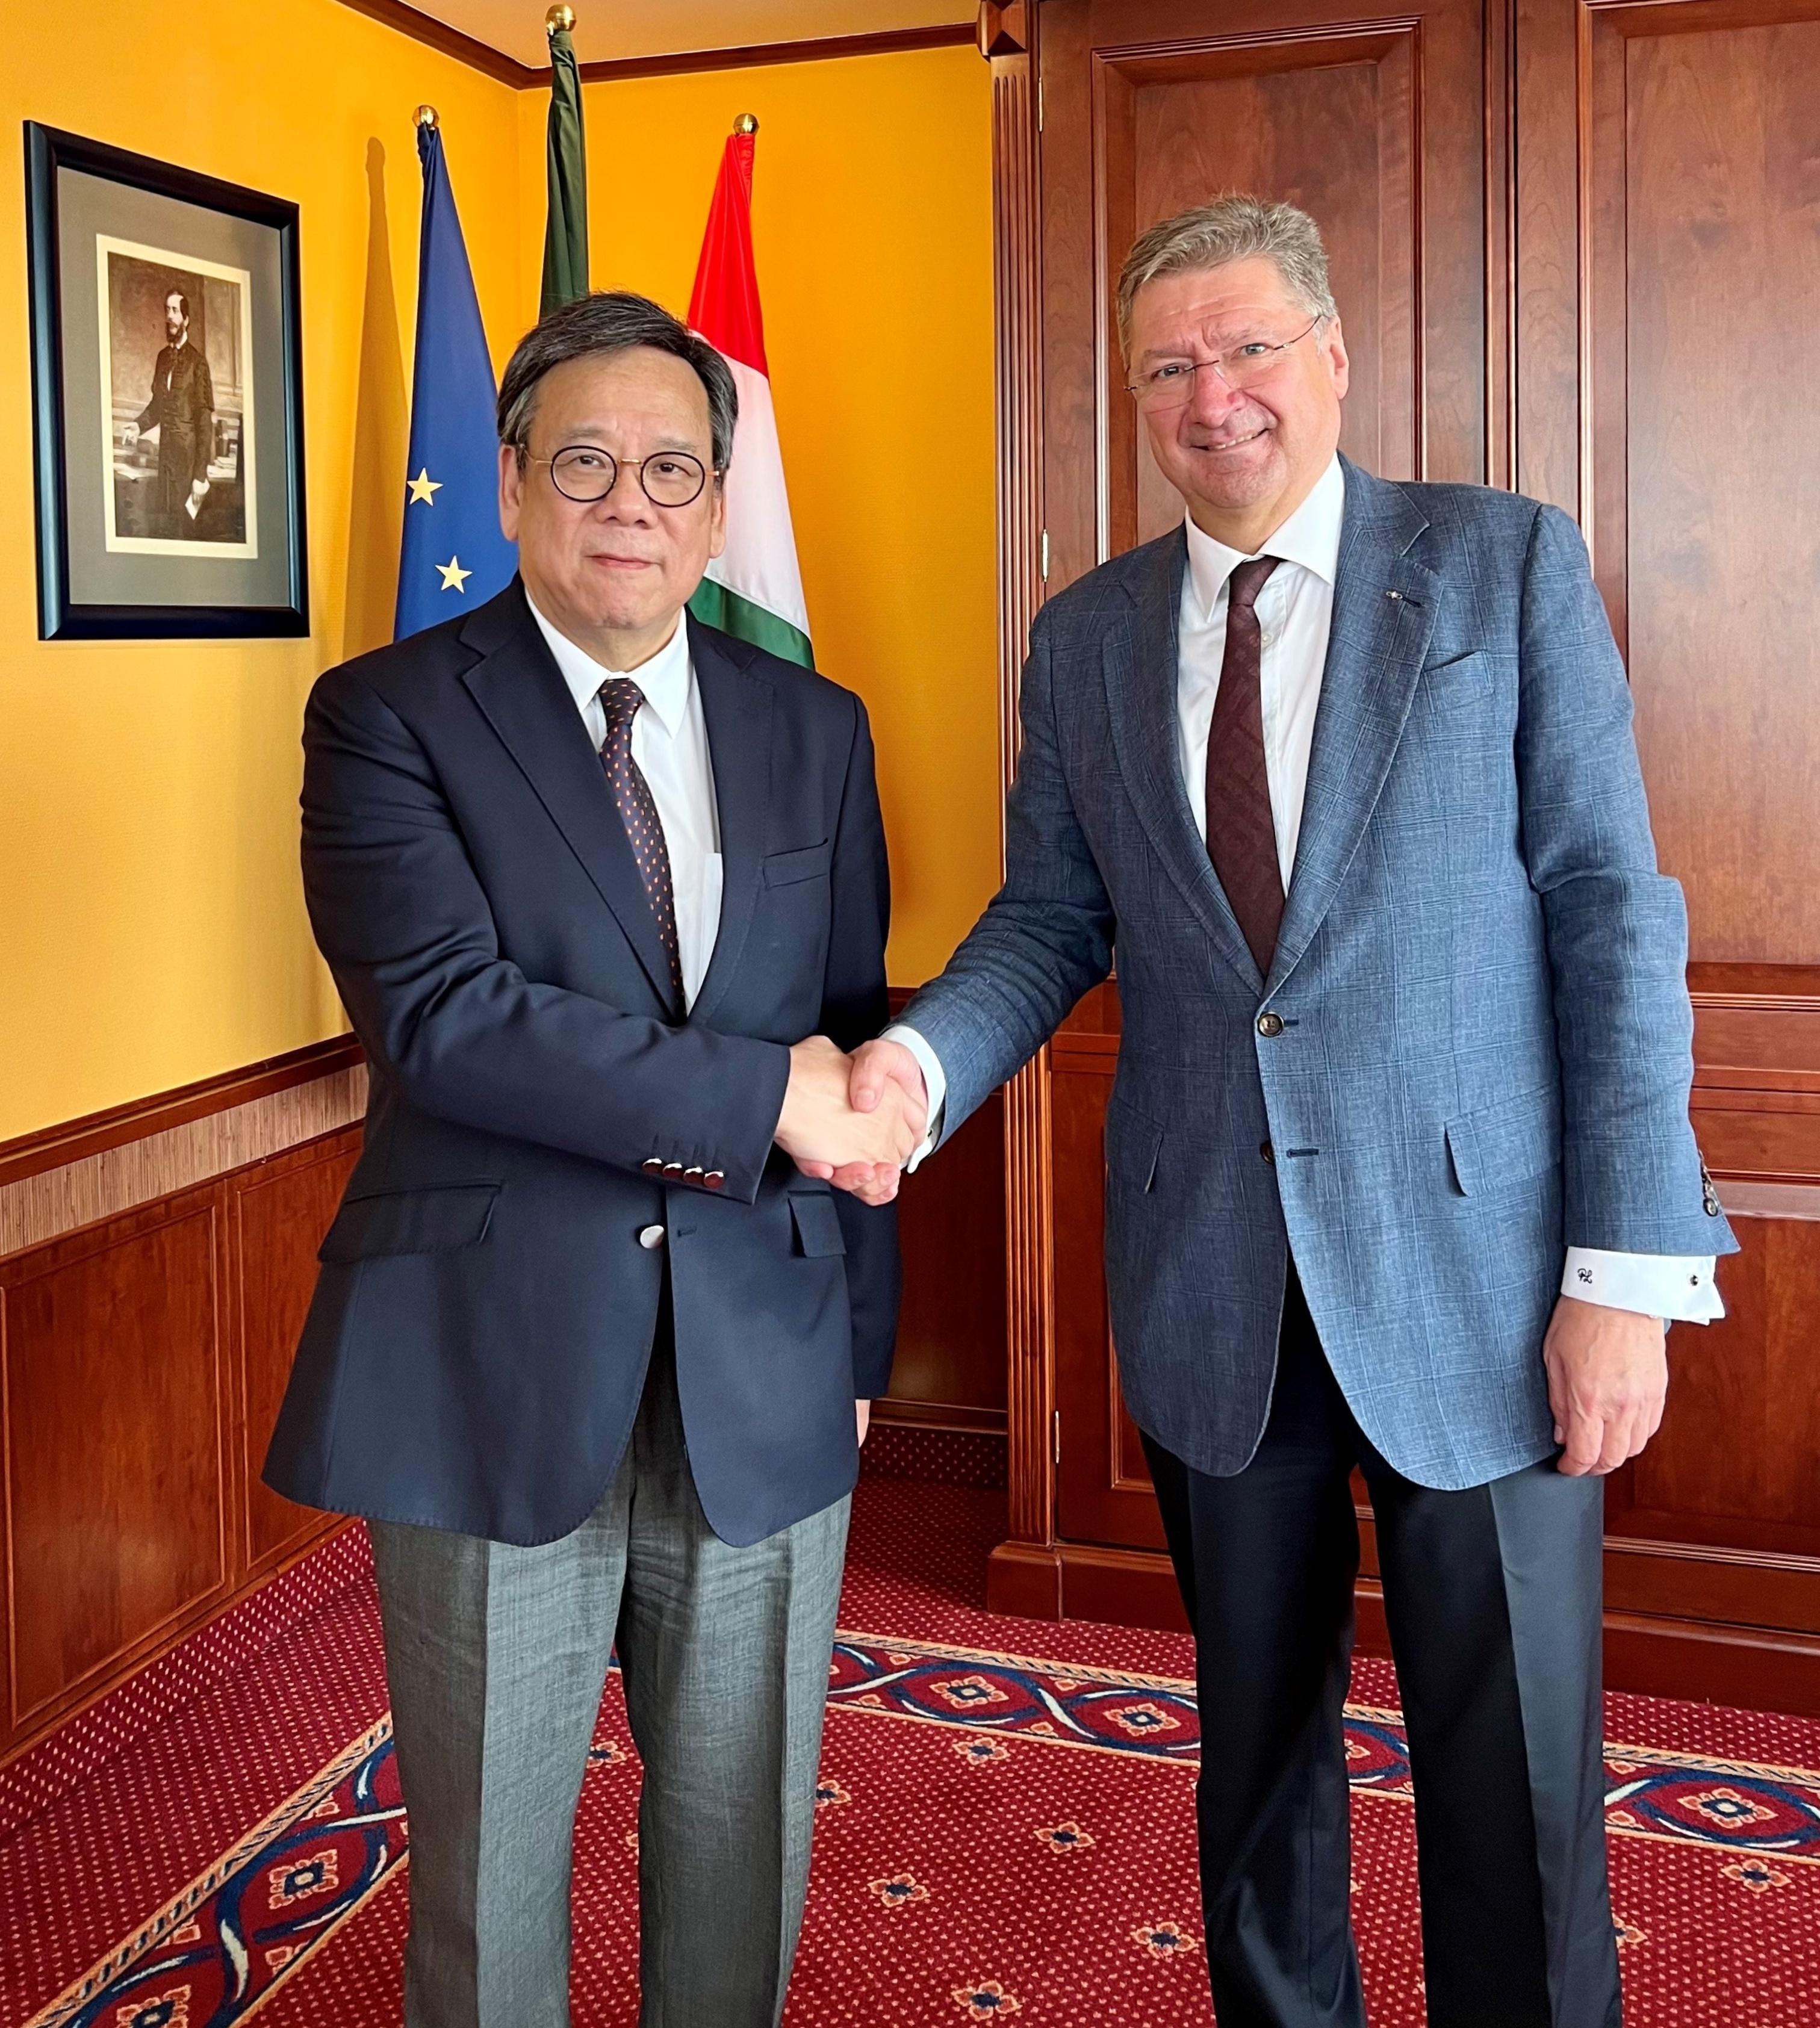 The Secretary for Commerce and Economic Development, Mr Algernon Yau (left), meets with the President of the Hungarian Chamber of Commerce and Industry, Mr László Parragh (right), in Budapest, Hungary, on June 8 (Budapest time) to exchange views on fostering closer economic and trade co-operation between the two places.